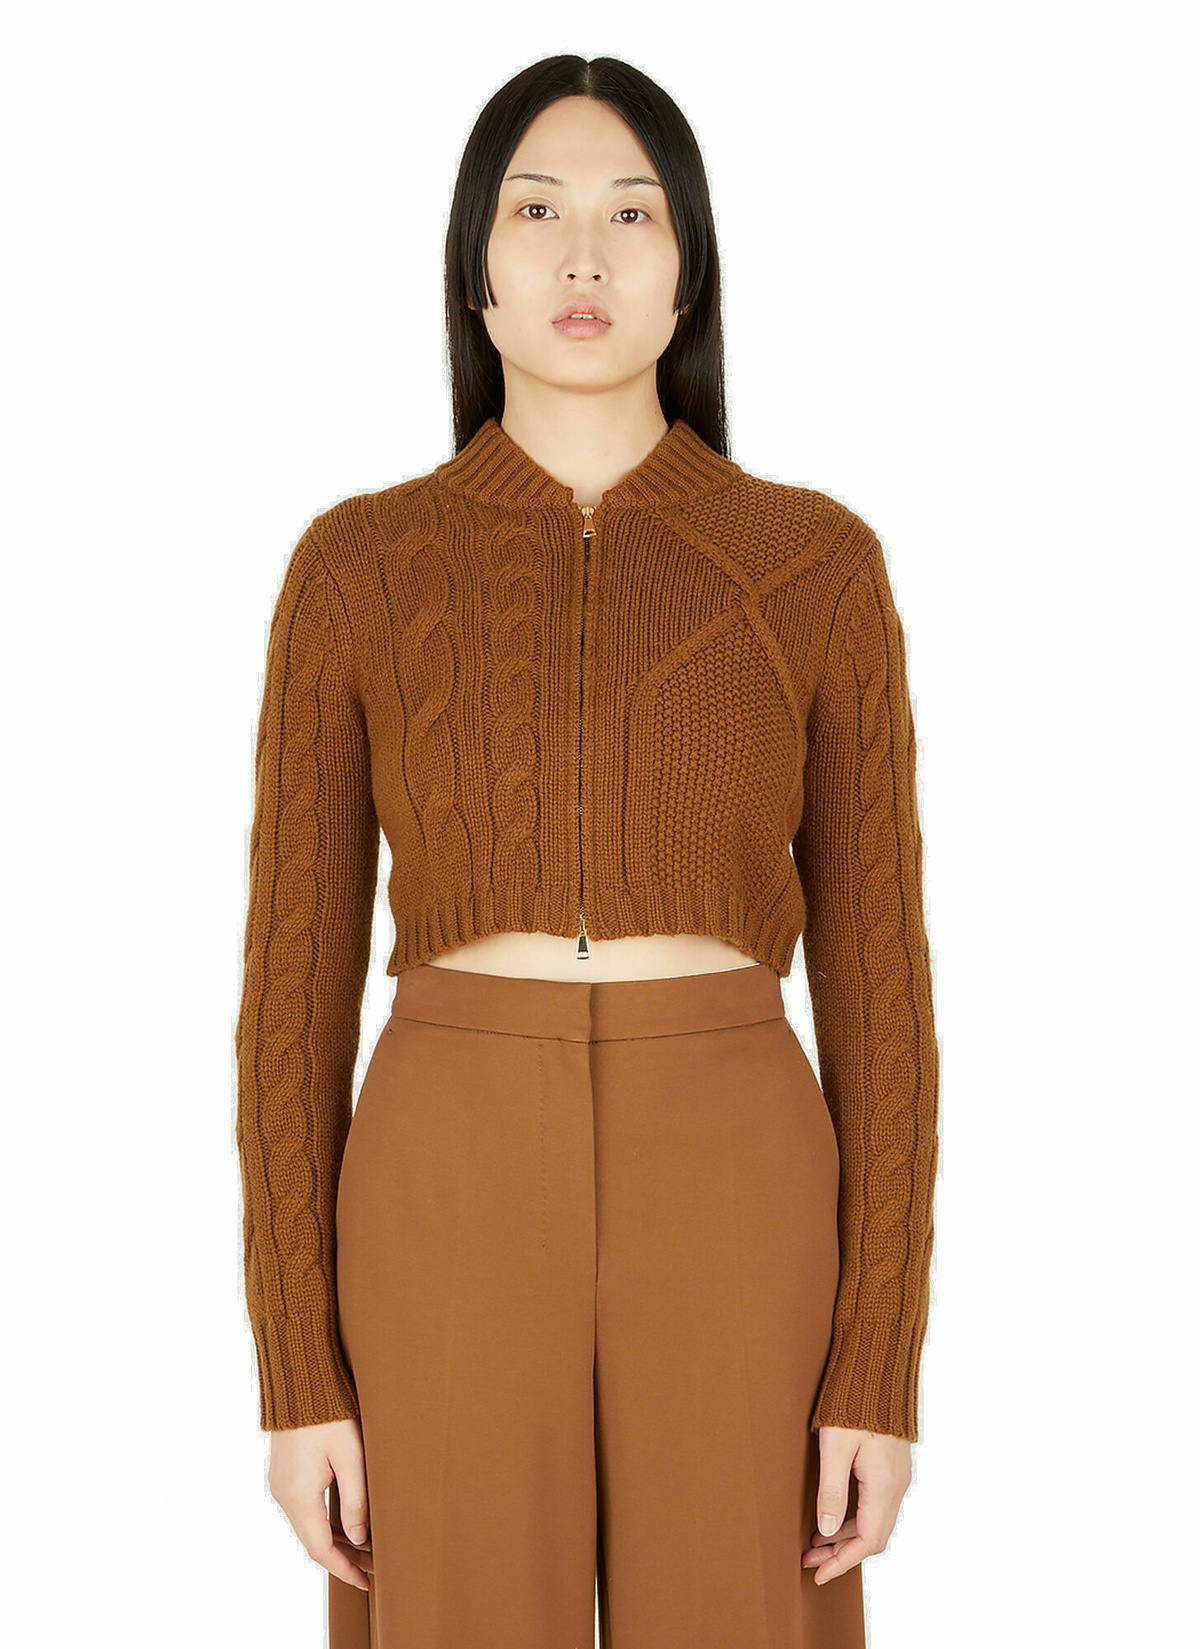 Fasto Cropped Sweater in Brown Max Mara